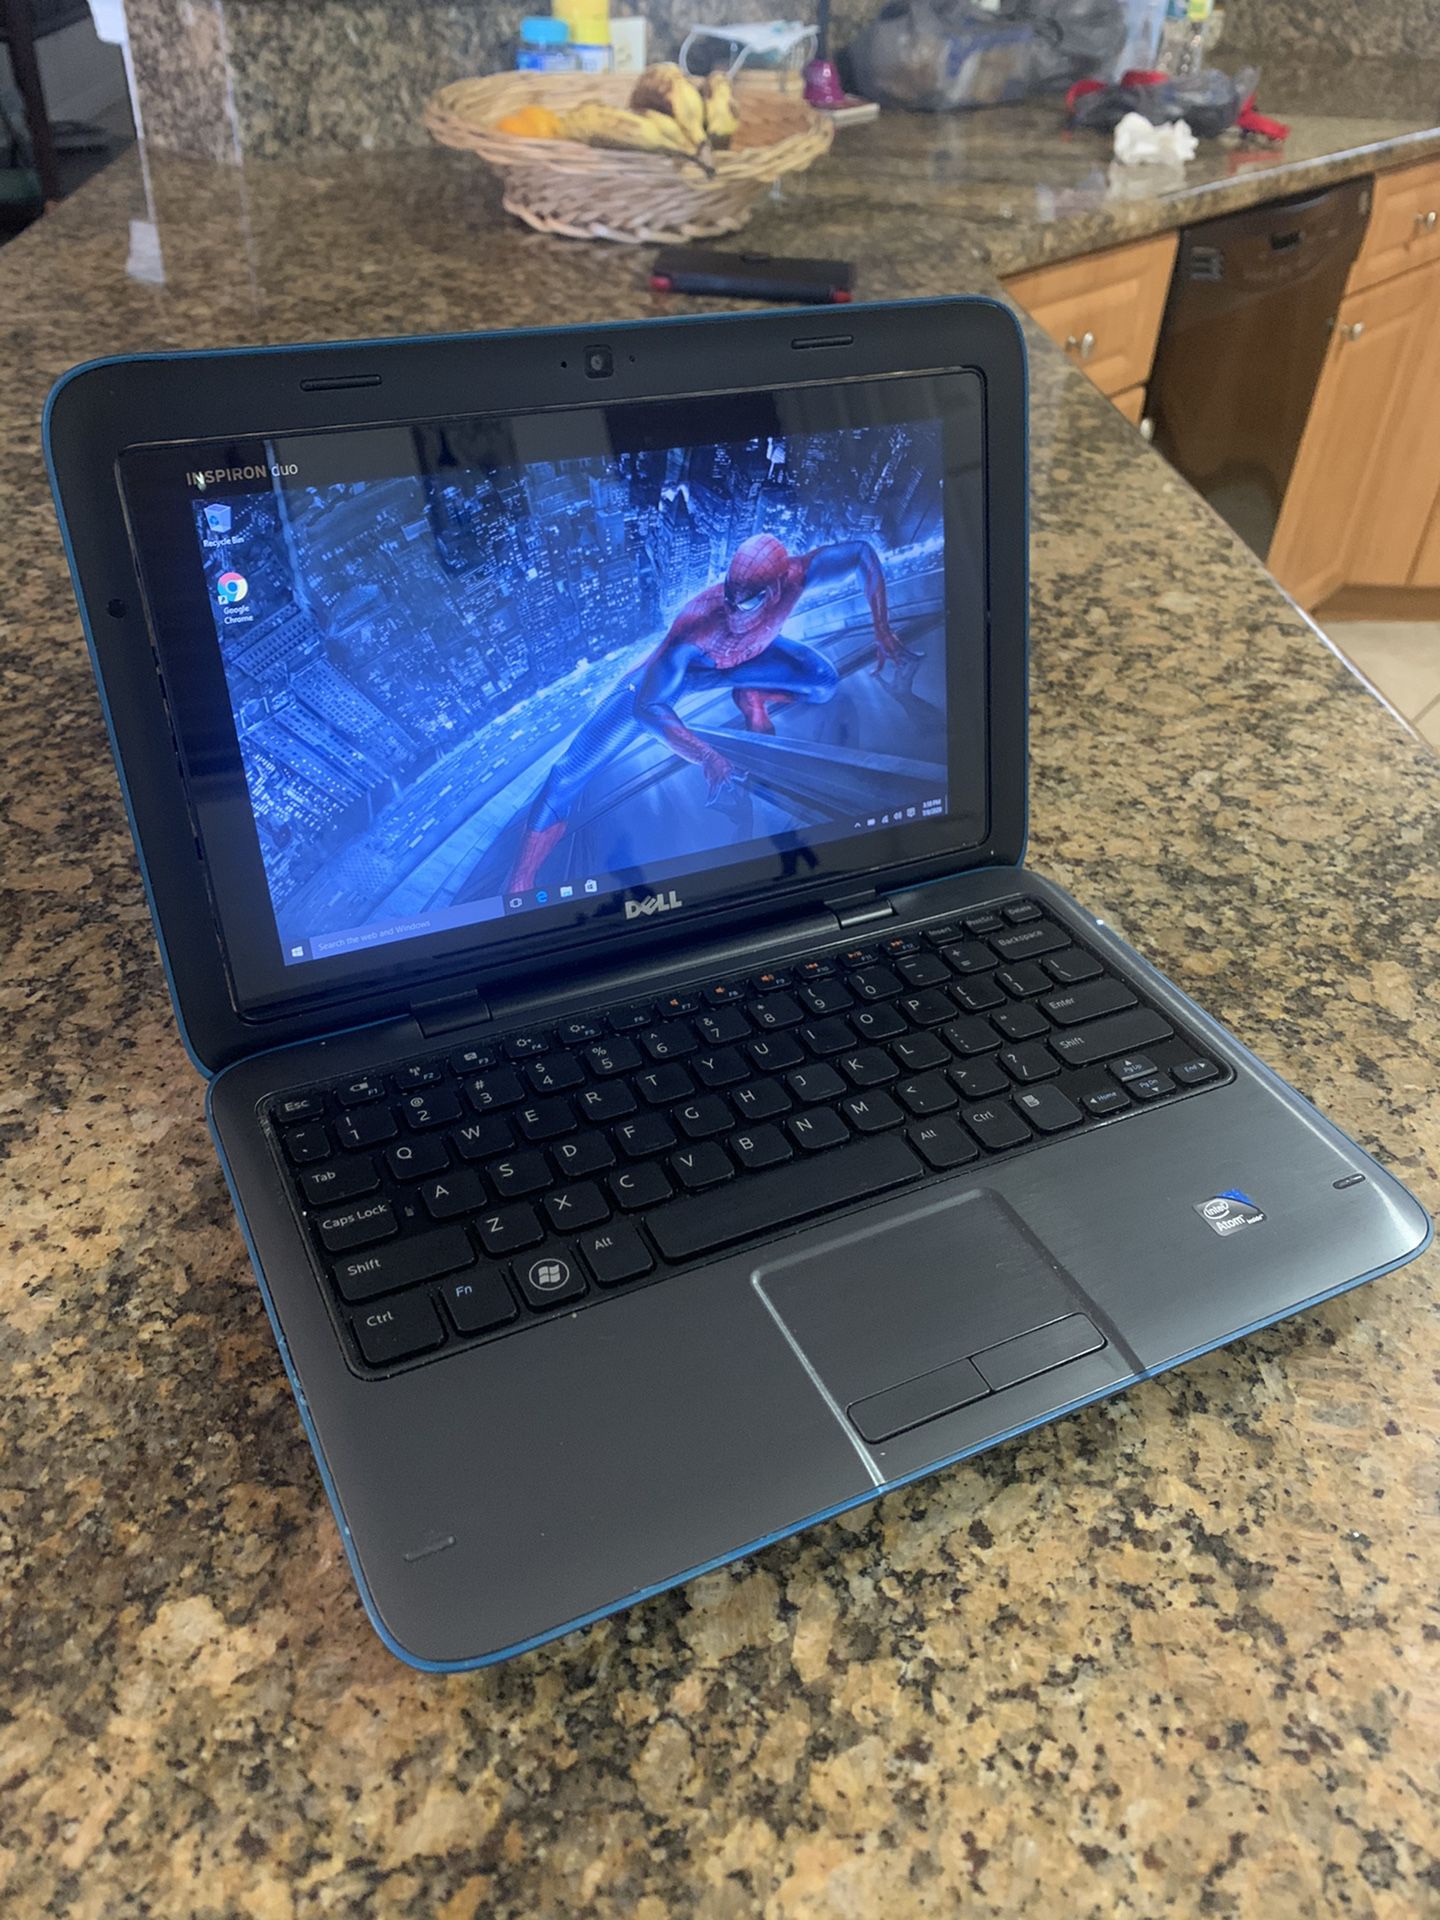 Dell 11” Laptop and works as a tablet also, touchscreen Windows 10 webcam